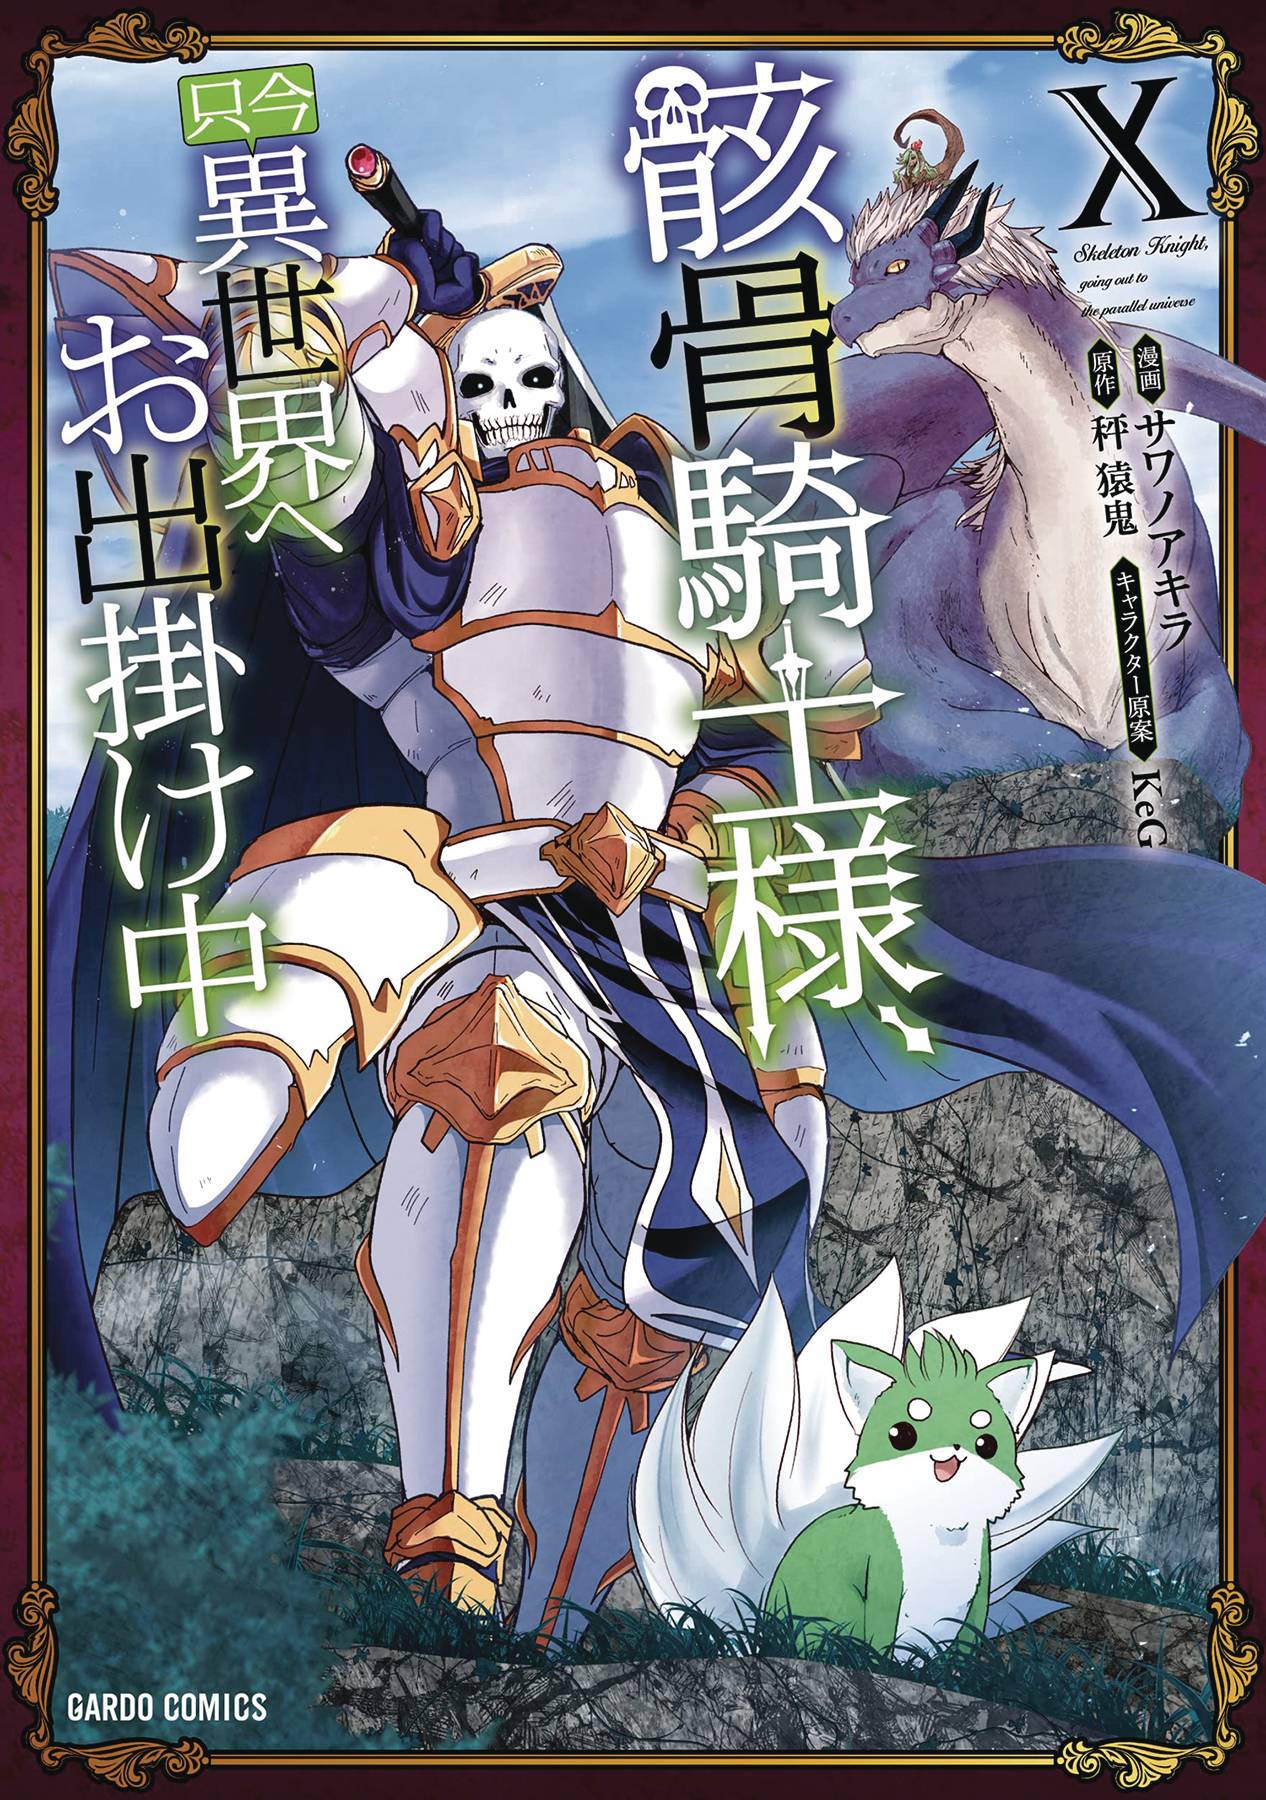 Skeleton Knight In Another World Gn Vol 10 (C: 0-1-1) (5/31/2023)